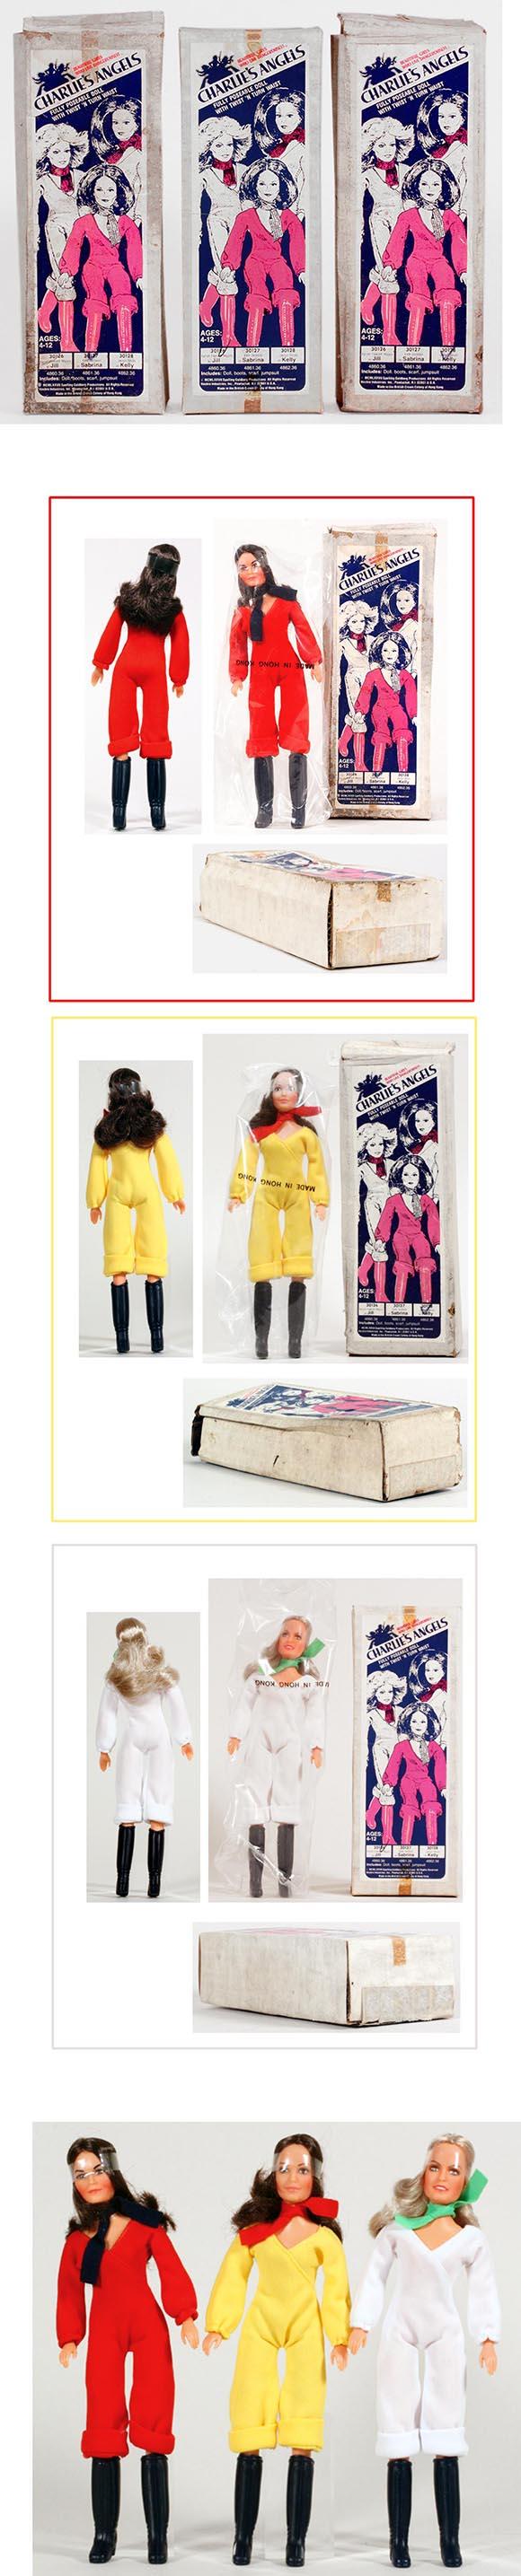 1977, All 3 Charlie's Angels Dolls in Original Boxes (1st Version)